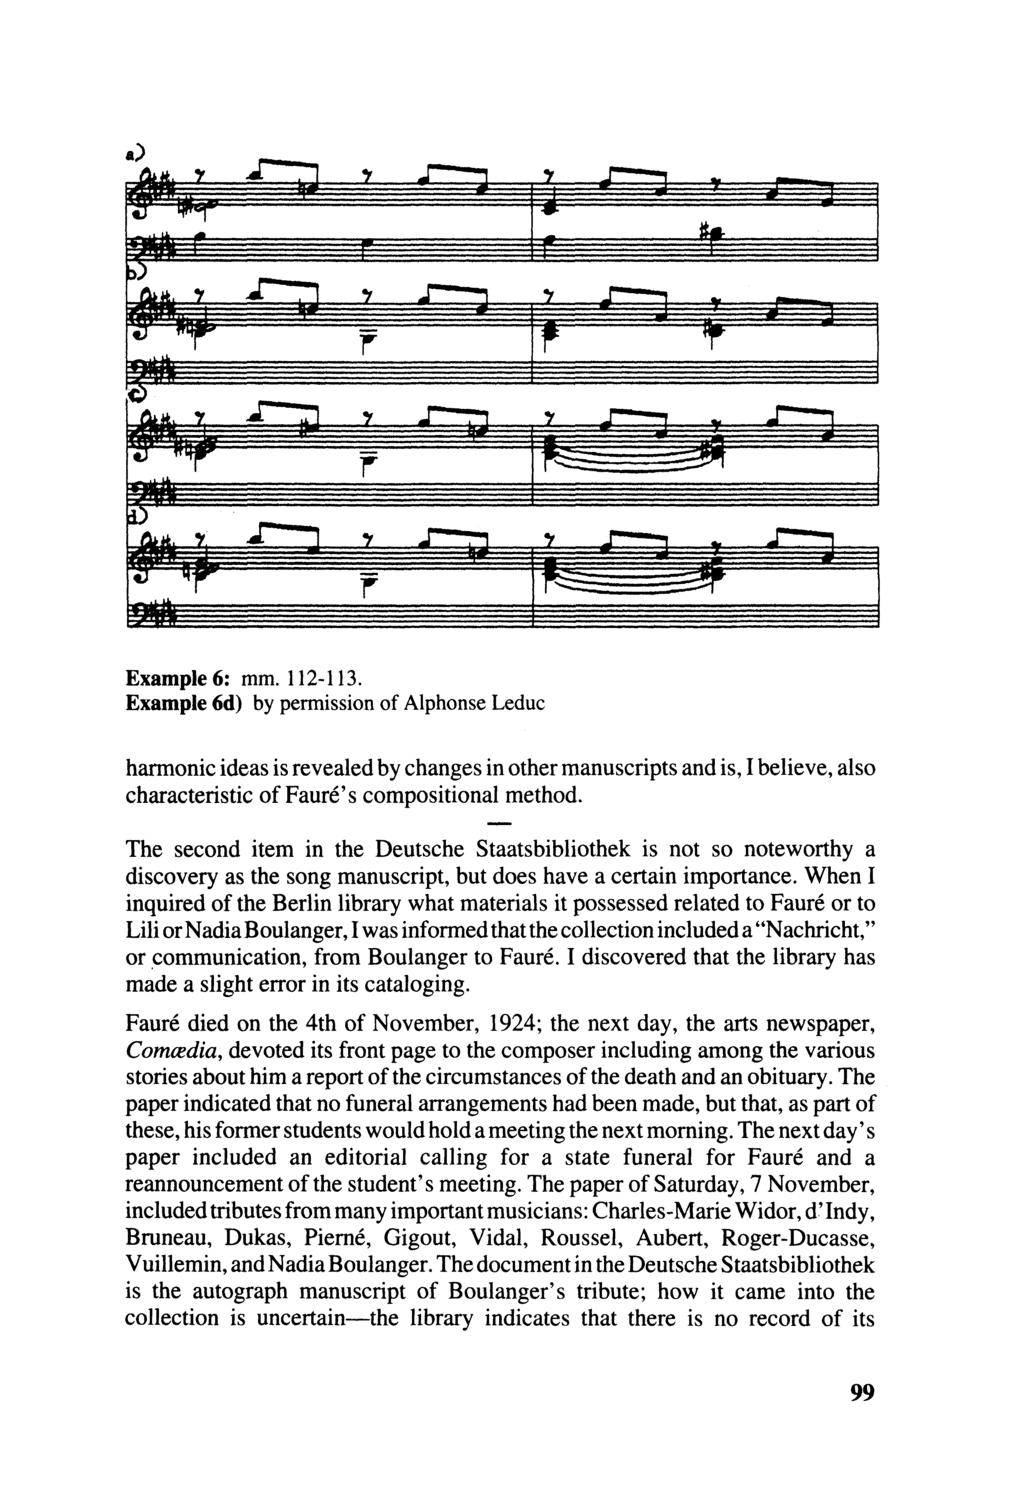 Example 6: mm. 112-113. Example 6d) by permission of Alphonse Leduc harmonic ideas is revealed by changes in other manuscripts and is, I believe, also characteristic of Fauré's compositional method.